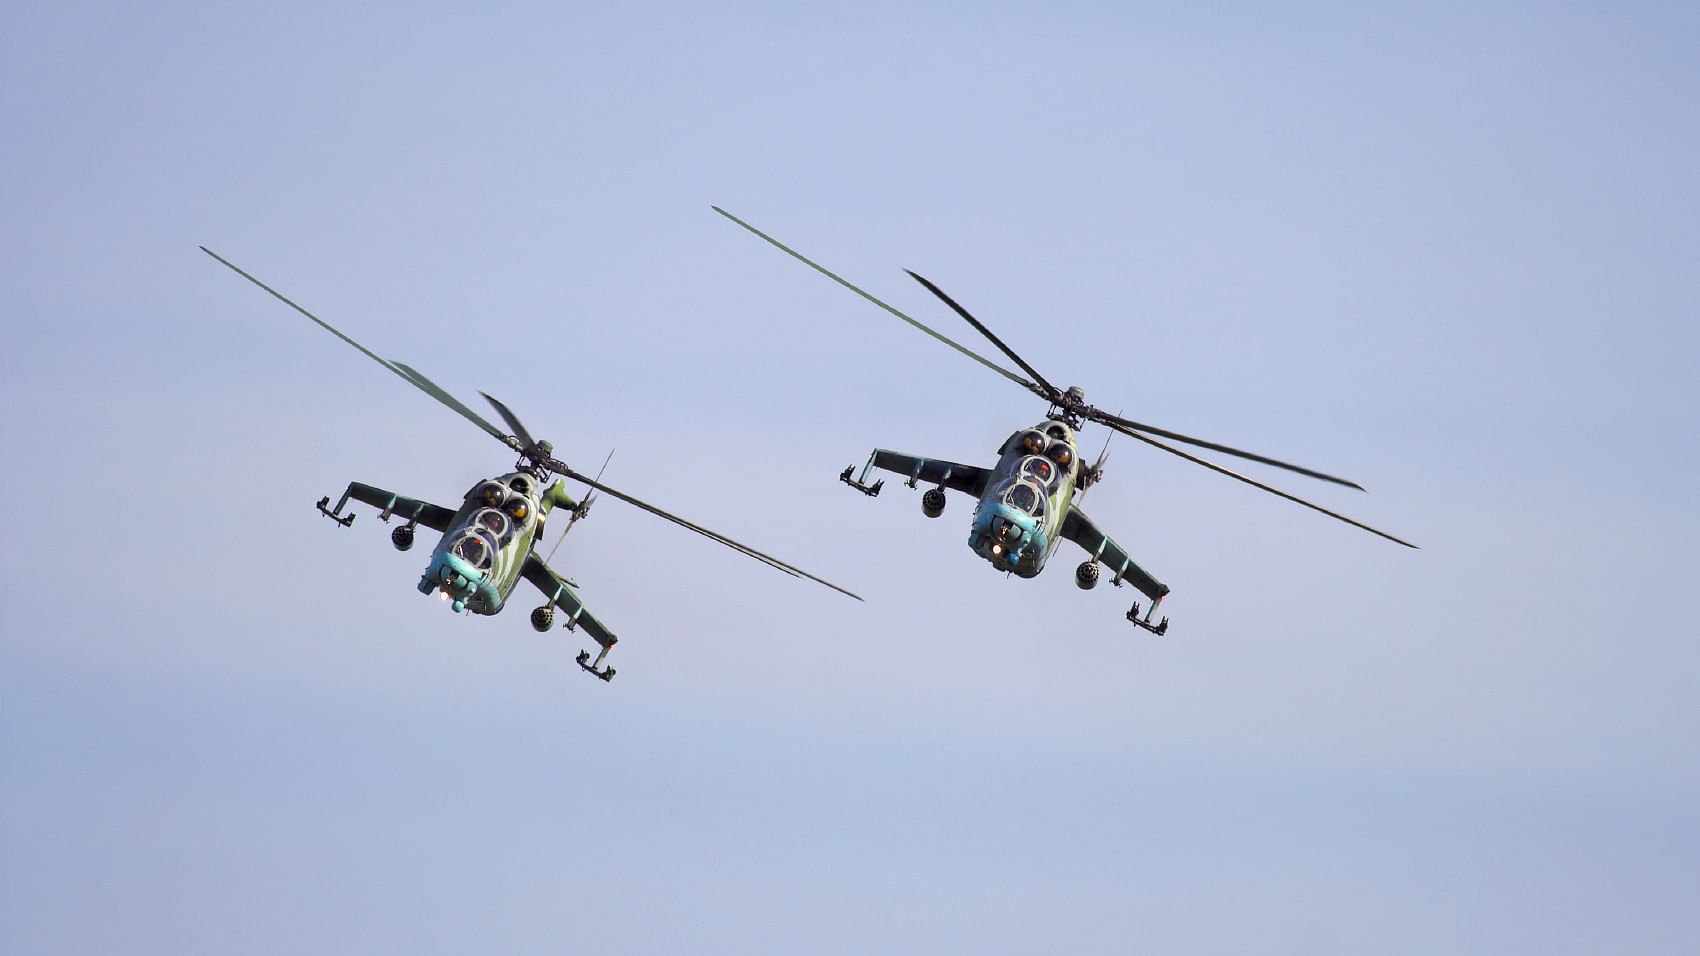 Mi-24 choppers, of which the Mi-25s are a variant, pictured. (Photo: iStockphoto)  